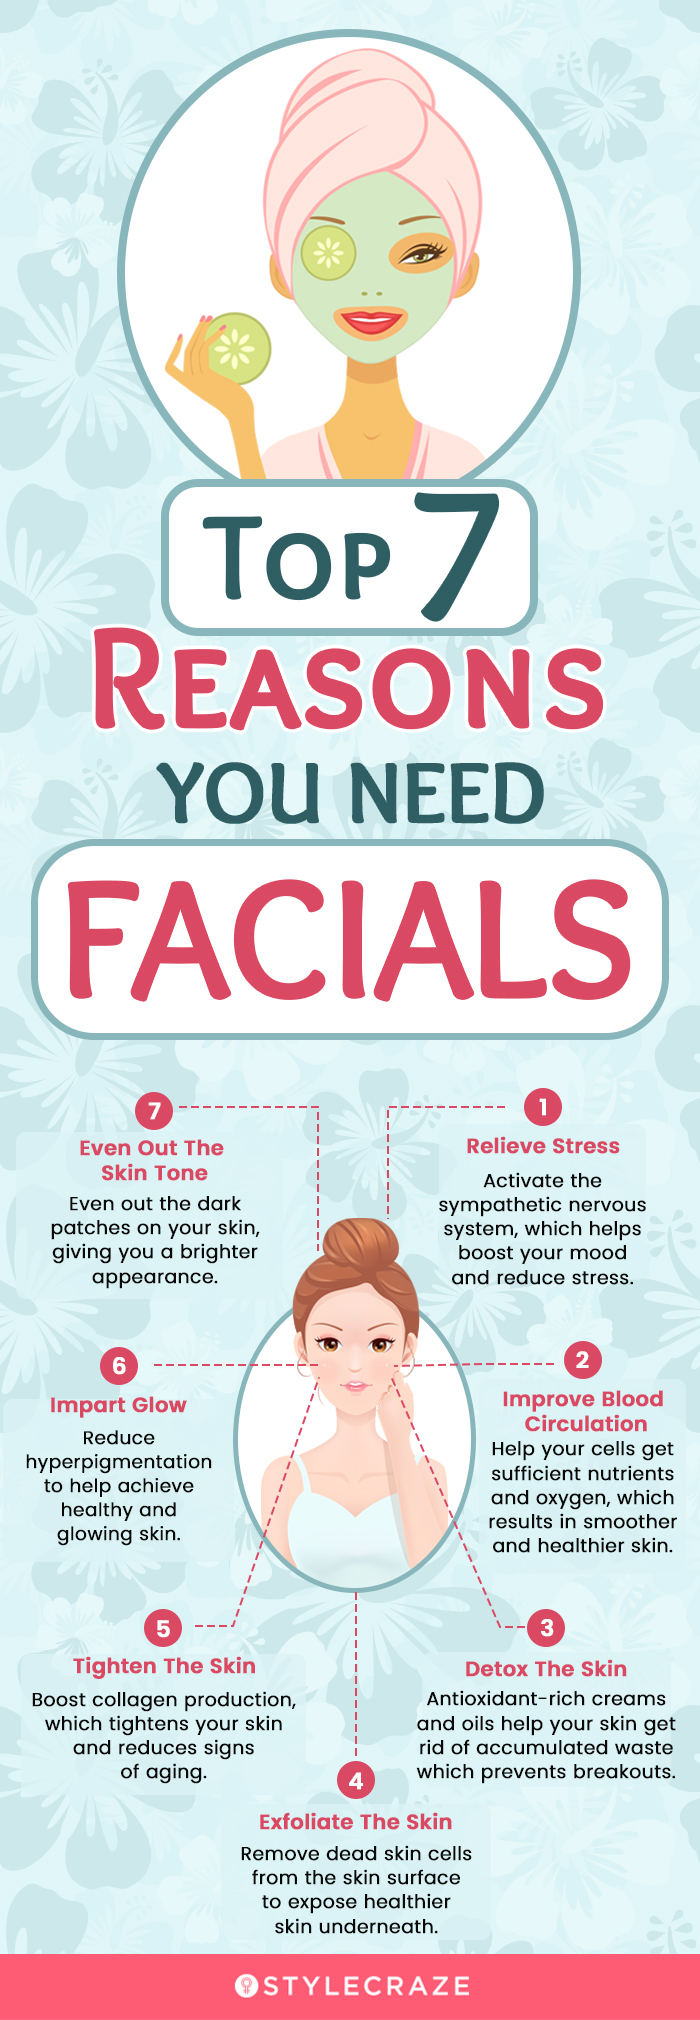 top 7 reasons why you need facials (infographic)